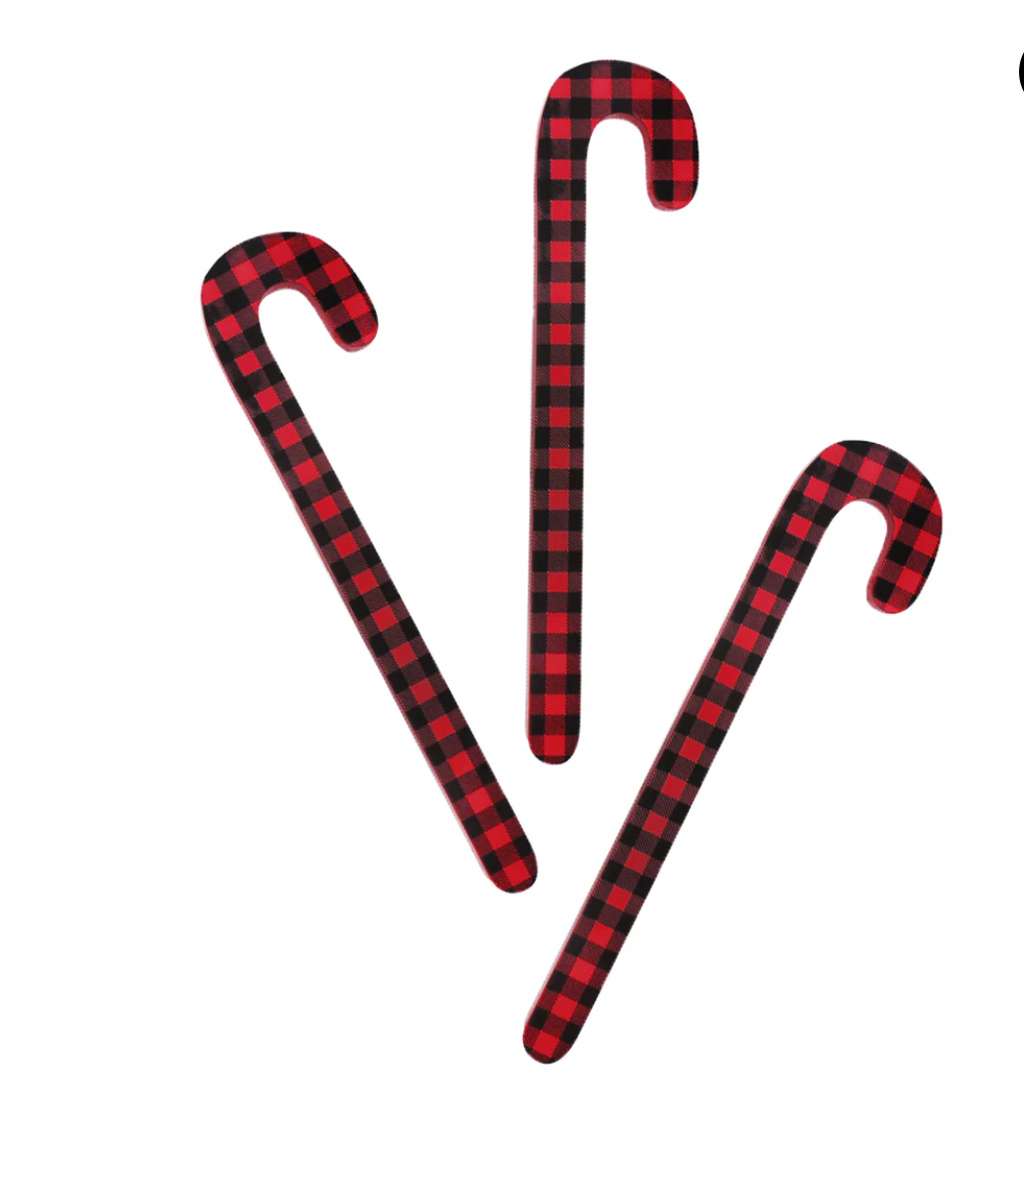 Red & Black Check Candy Canes - set of 3